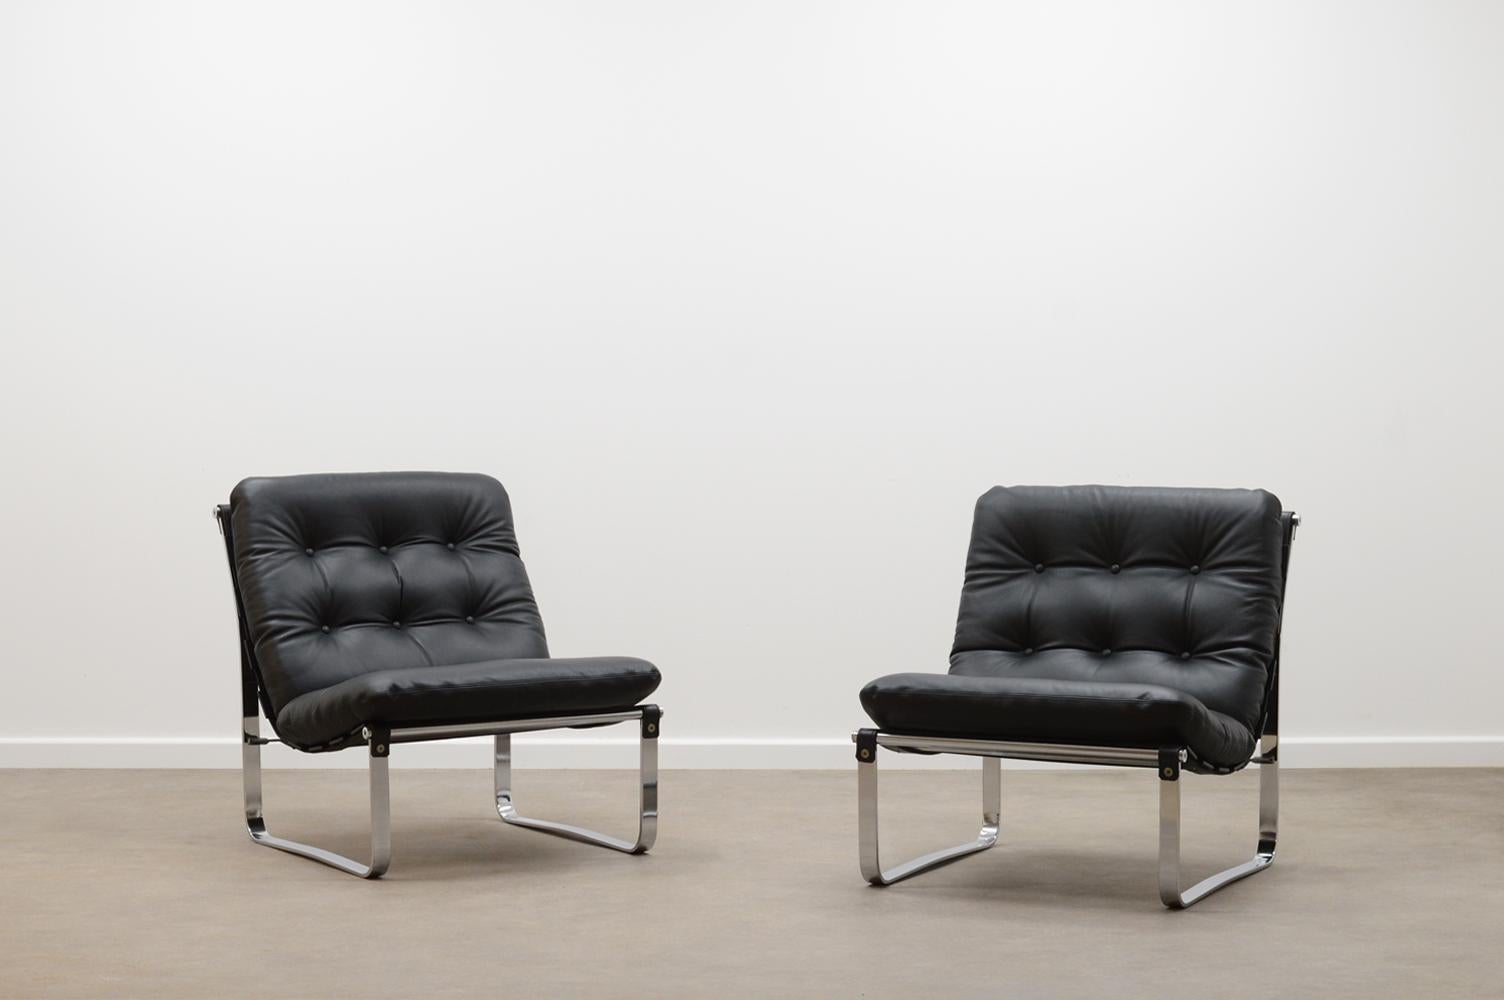 Set of 2 sling chairs by Ico Parisi for MIM Roma, Italy 60’s. Chrome metal frame, wooden slats and reupholstered black leather seats. Some slats have been reattached at invisible places. Comfortable chairs in good vintage condition. 

